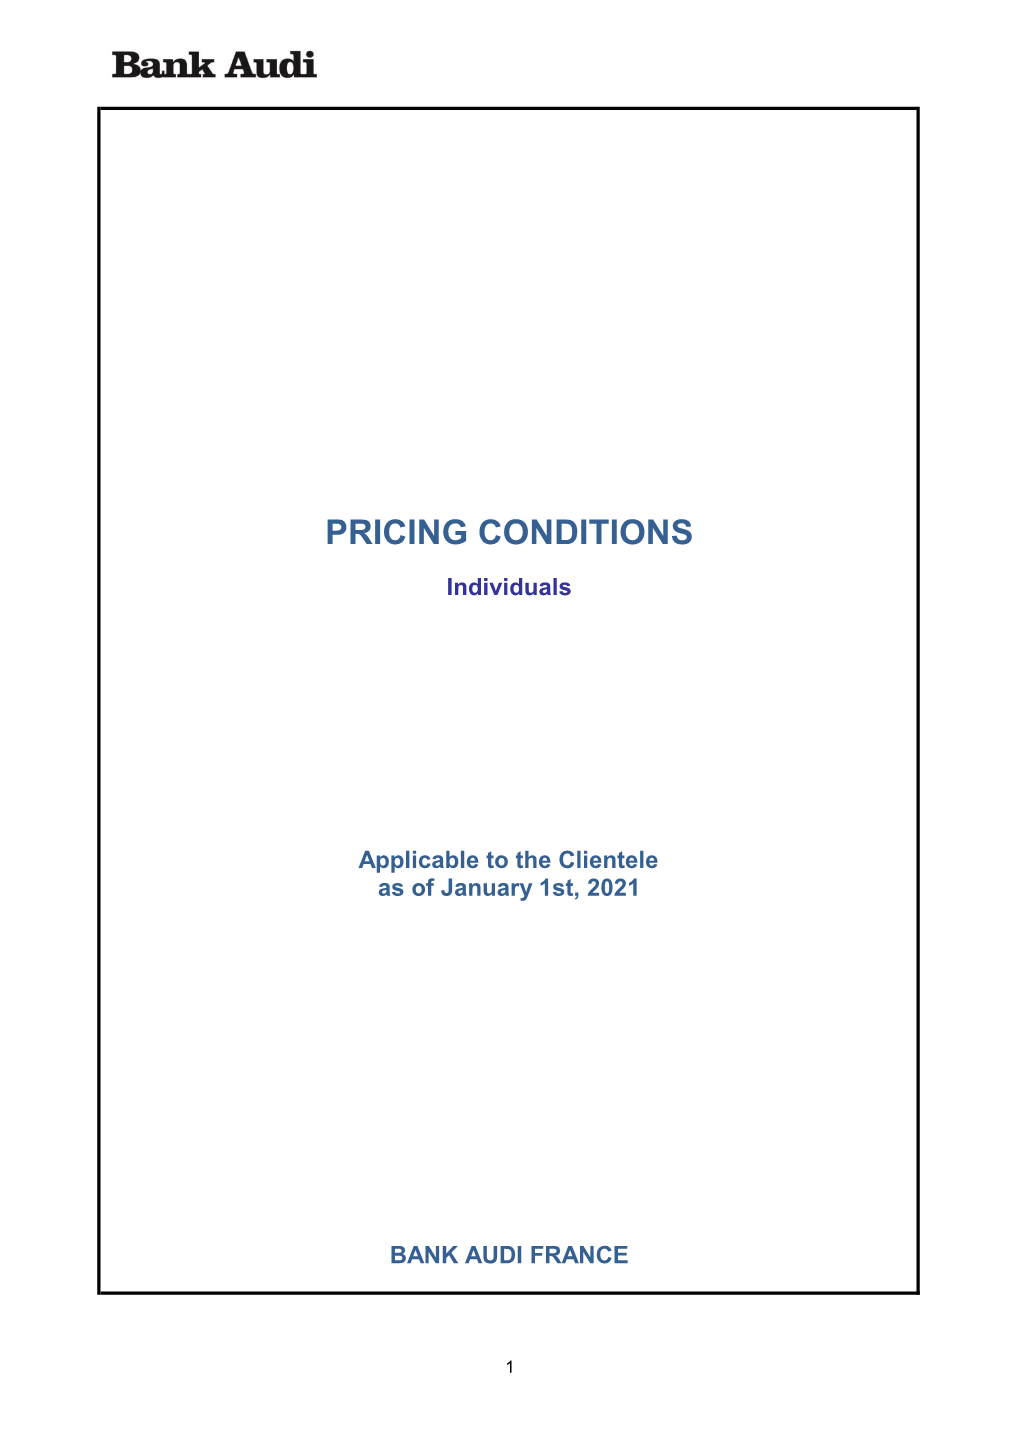 Pricing Conditions